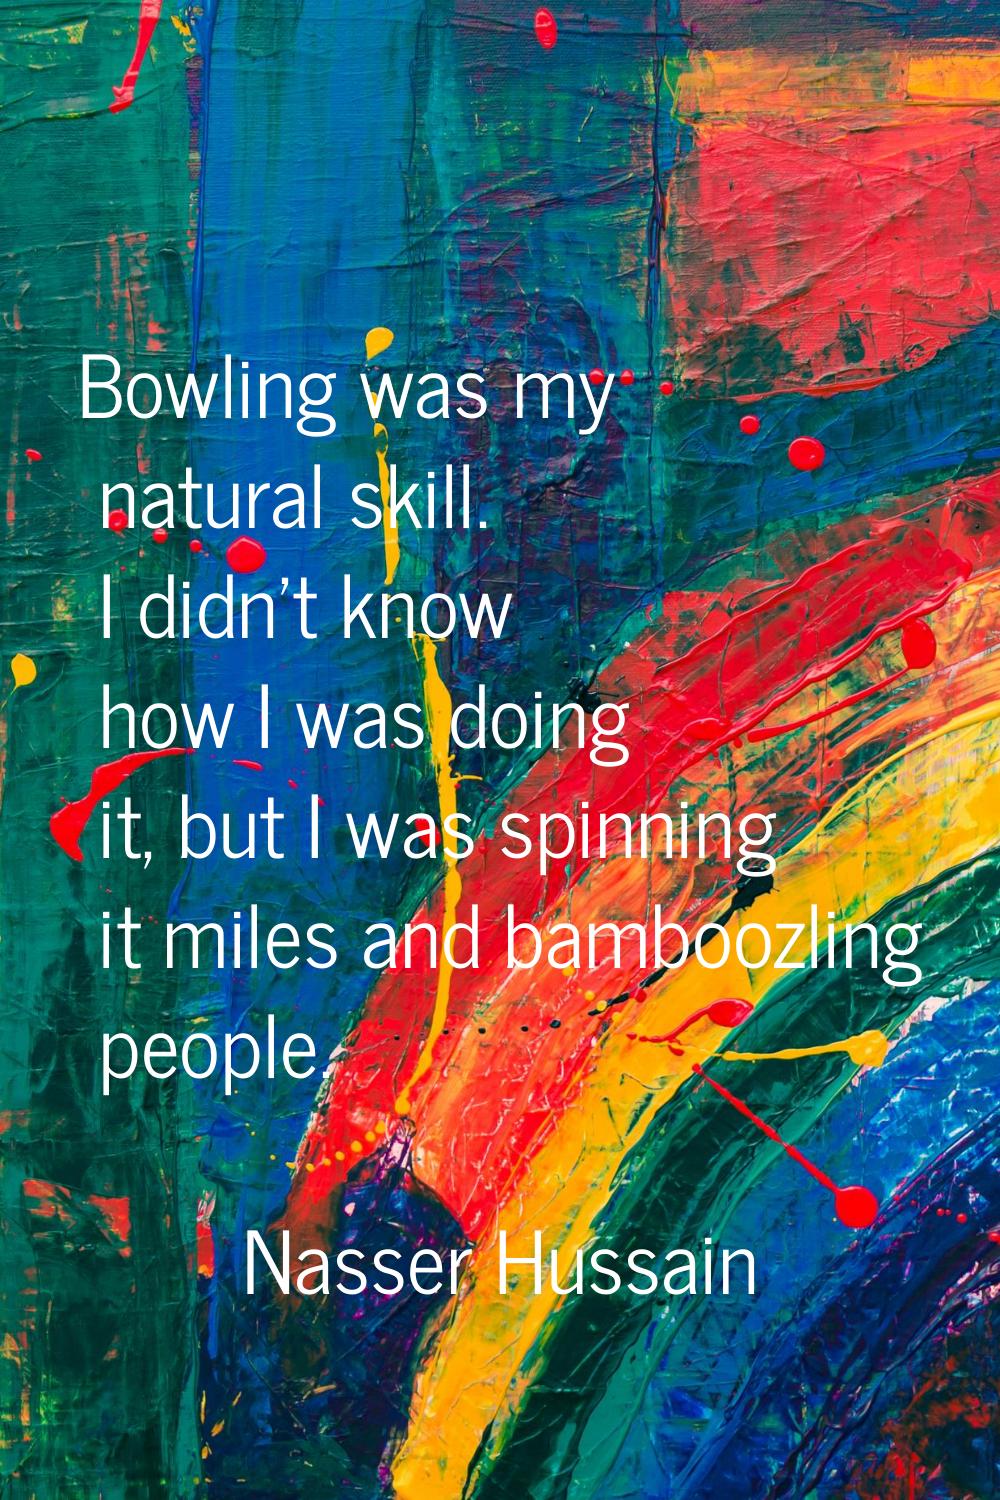 Bowling was my natural skill. I didn't know how I was doing it, but I was spinning it miles and bam